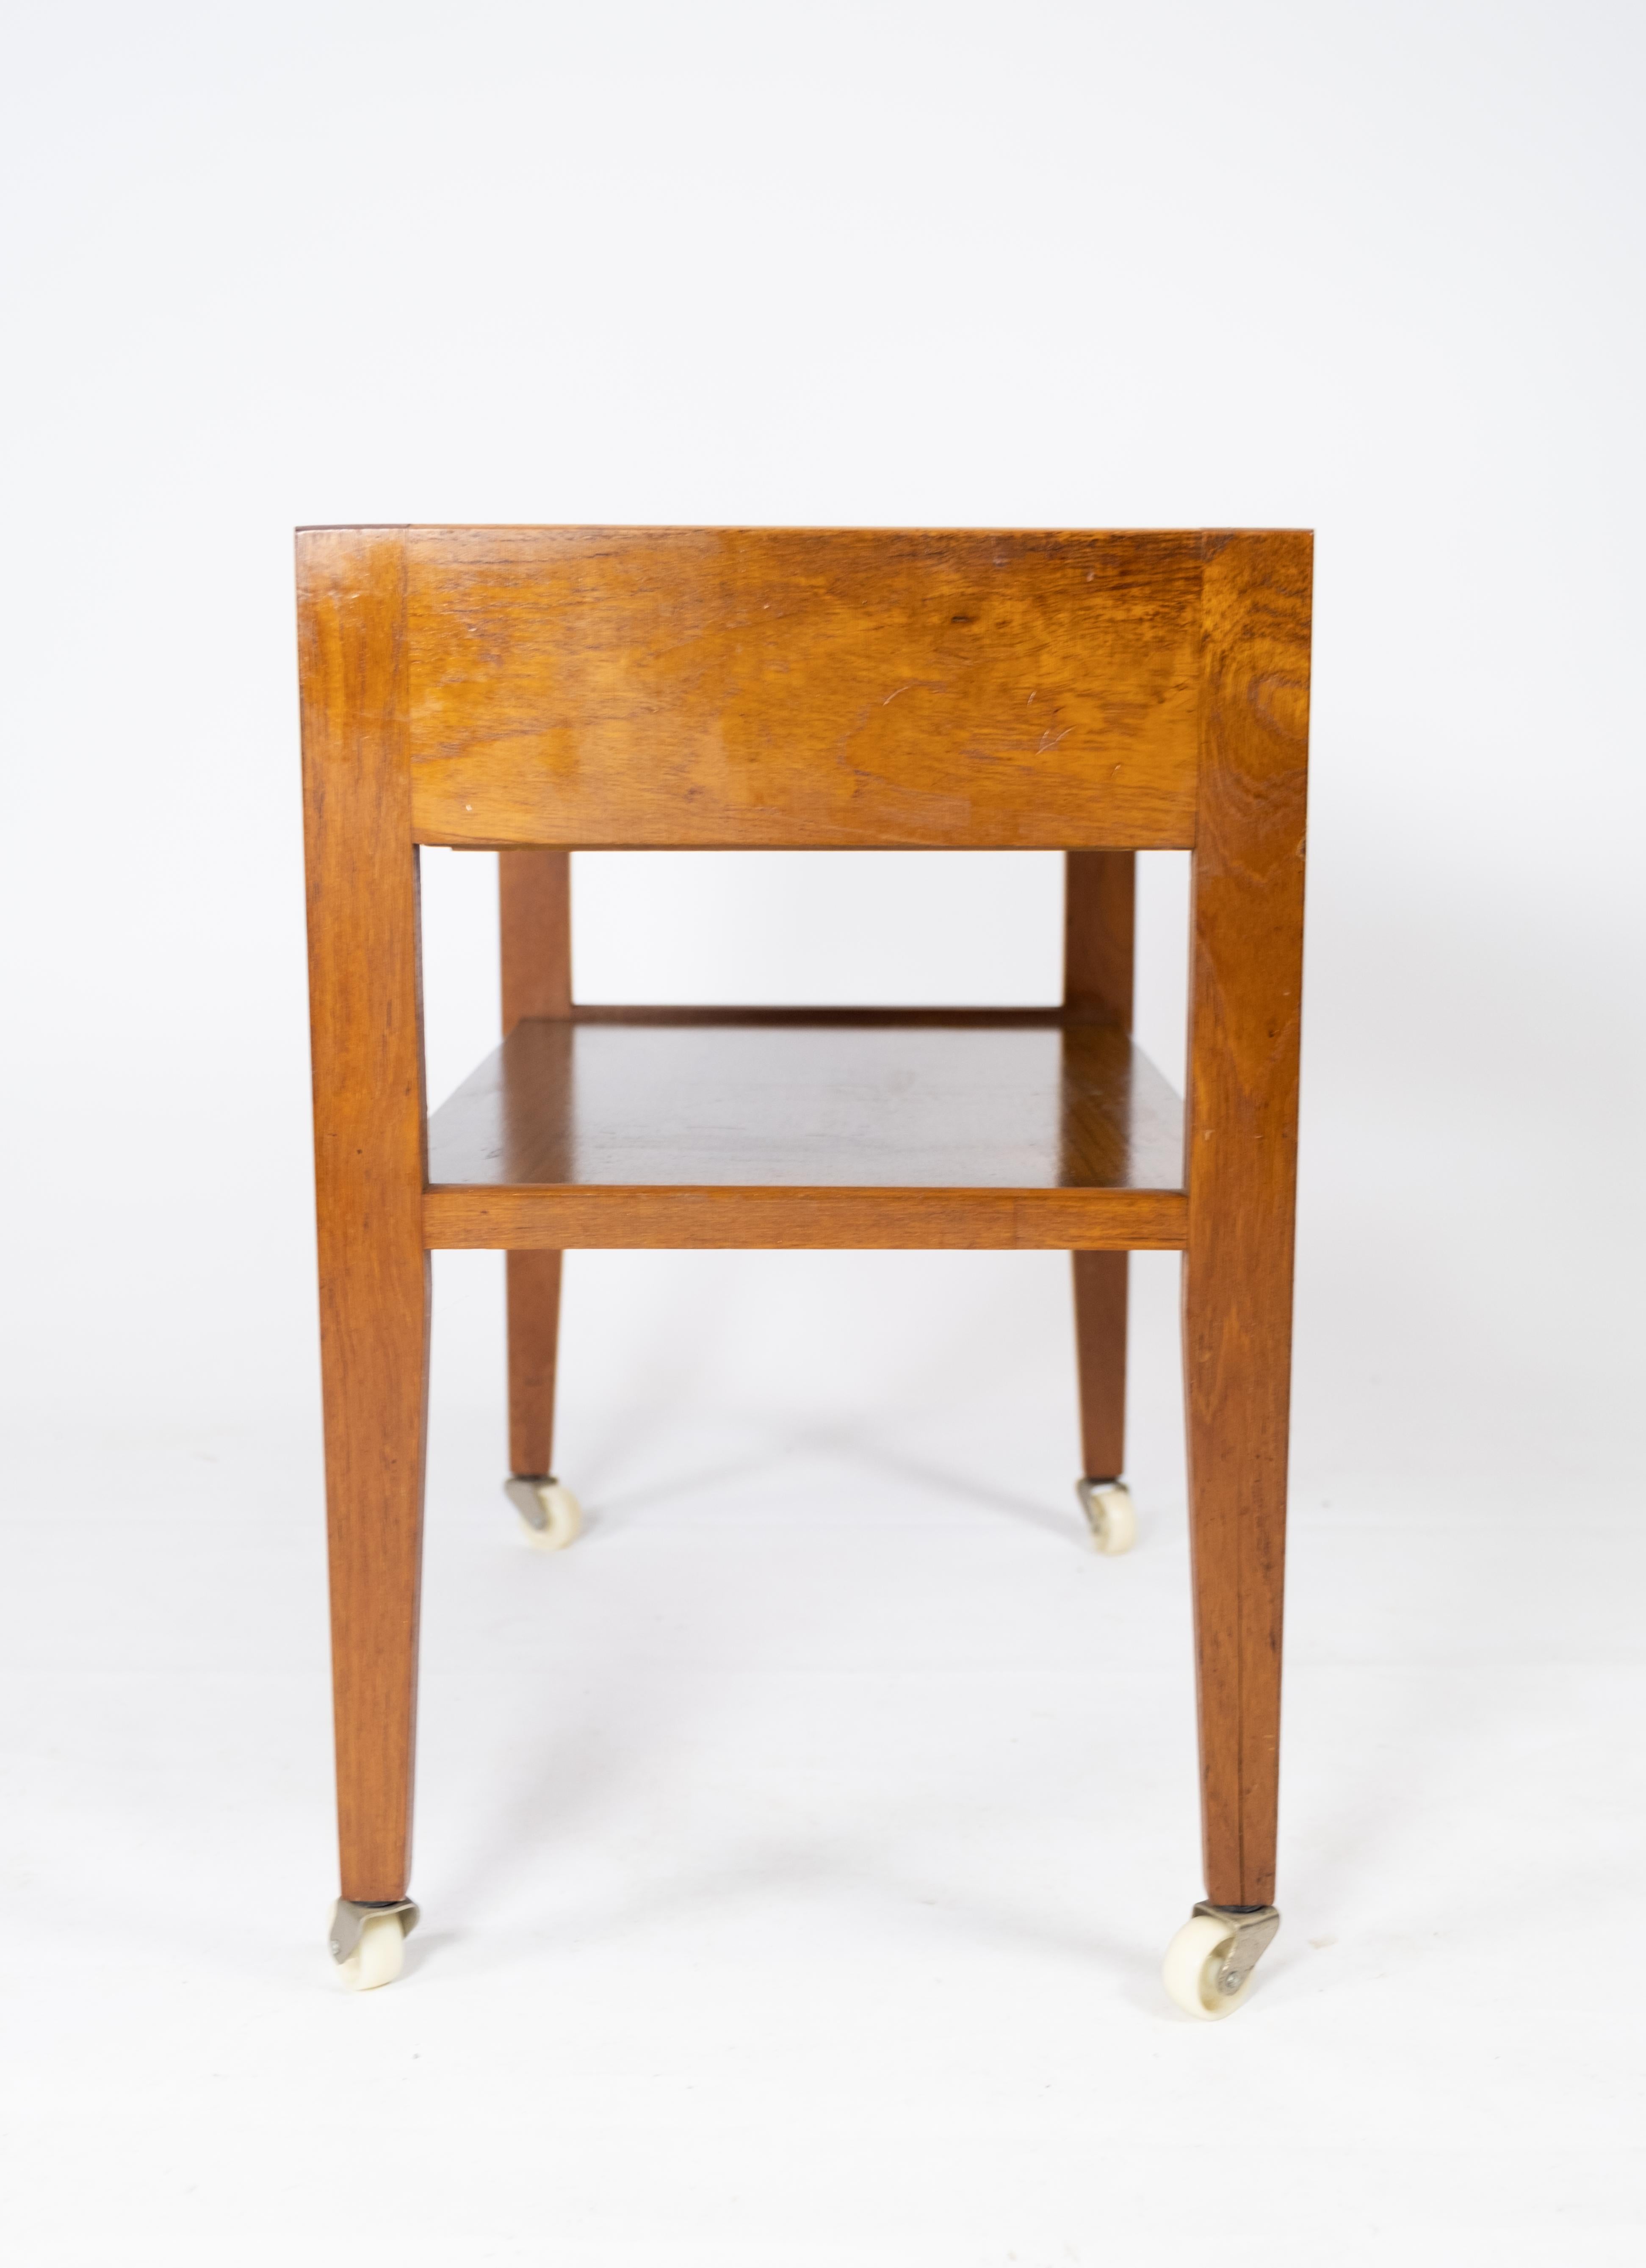 Scandinavian Modern Small Side Table with Drawer in Teak from the 1960s For Sale 1